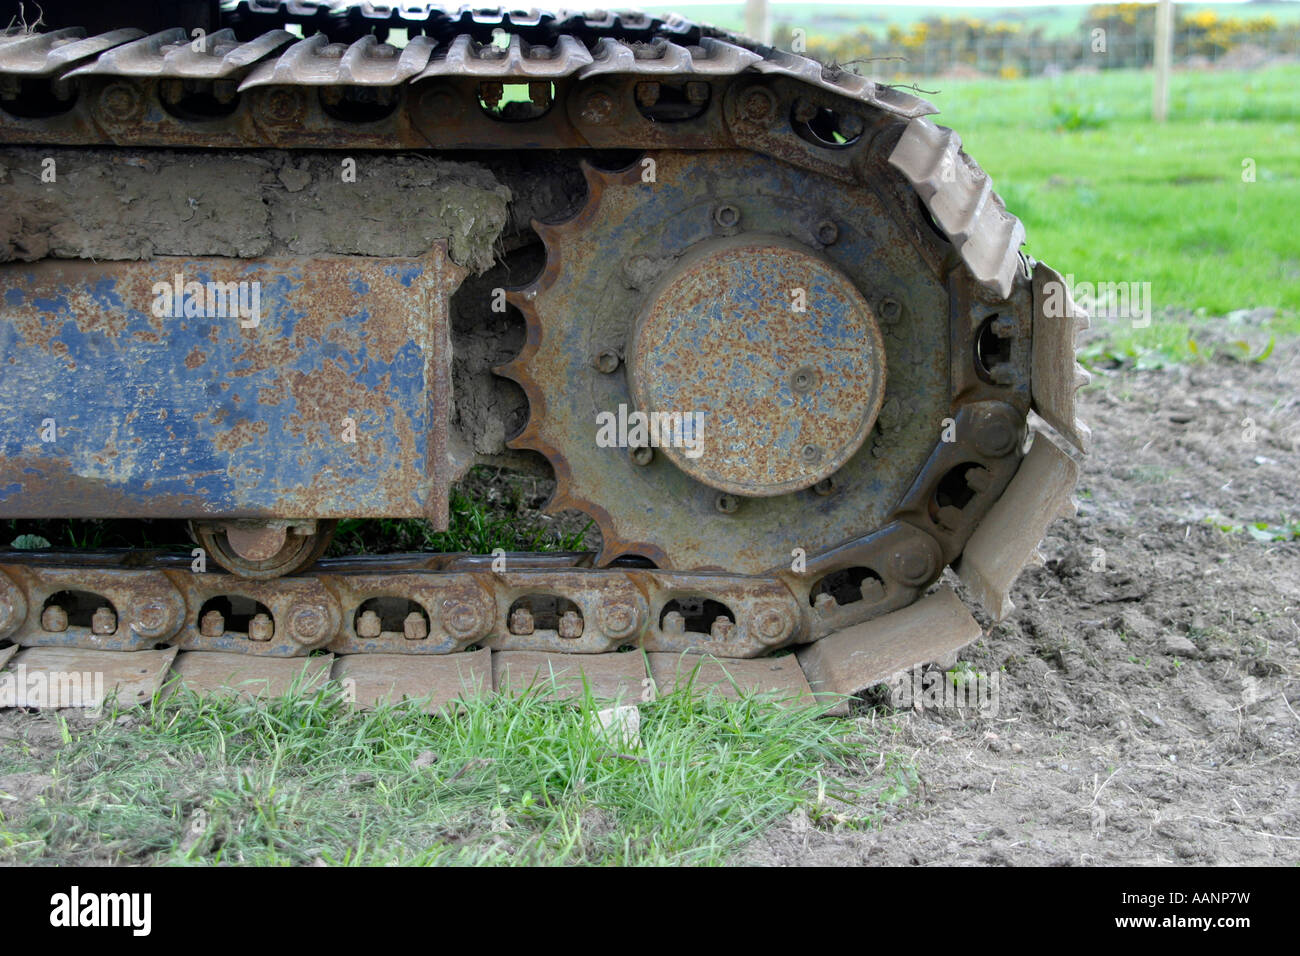 Rusted and bent caterpillar track on construction equipment Stock Photo